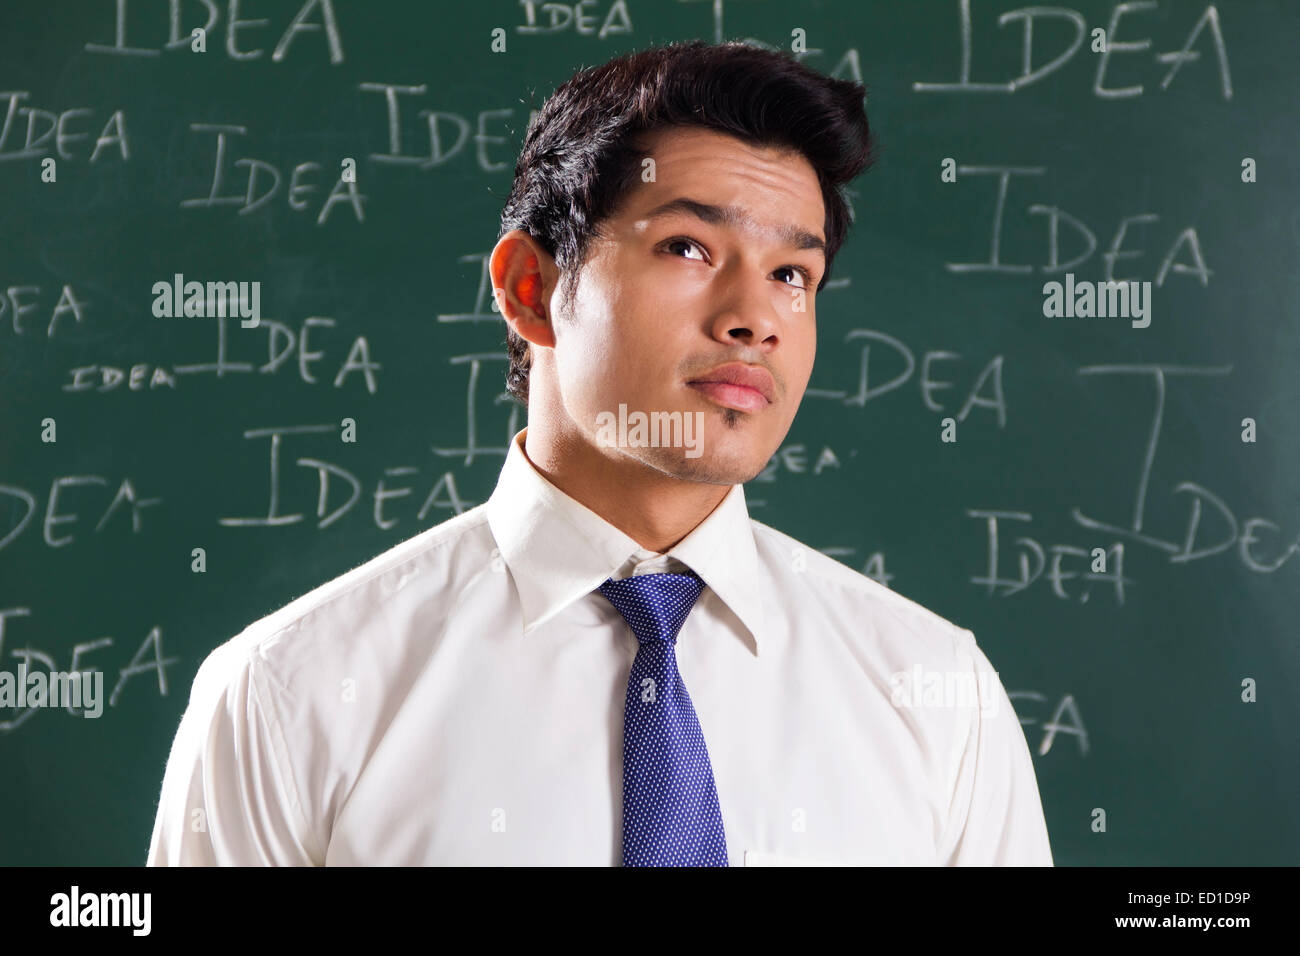 1 indian College Student Business Man Stock Photo